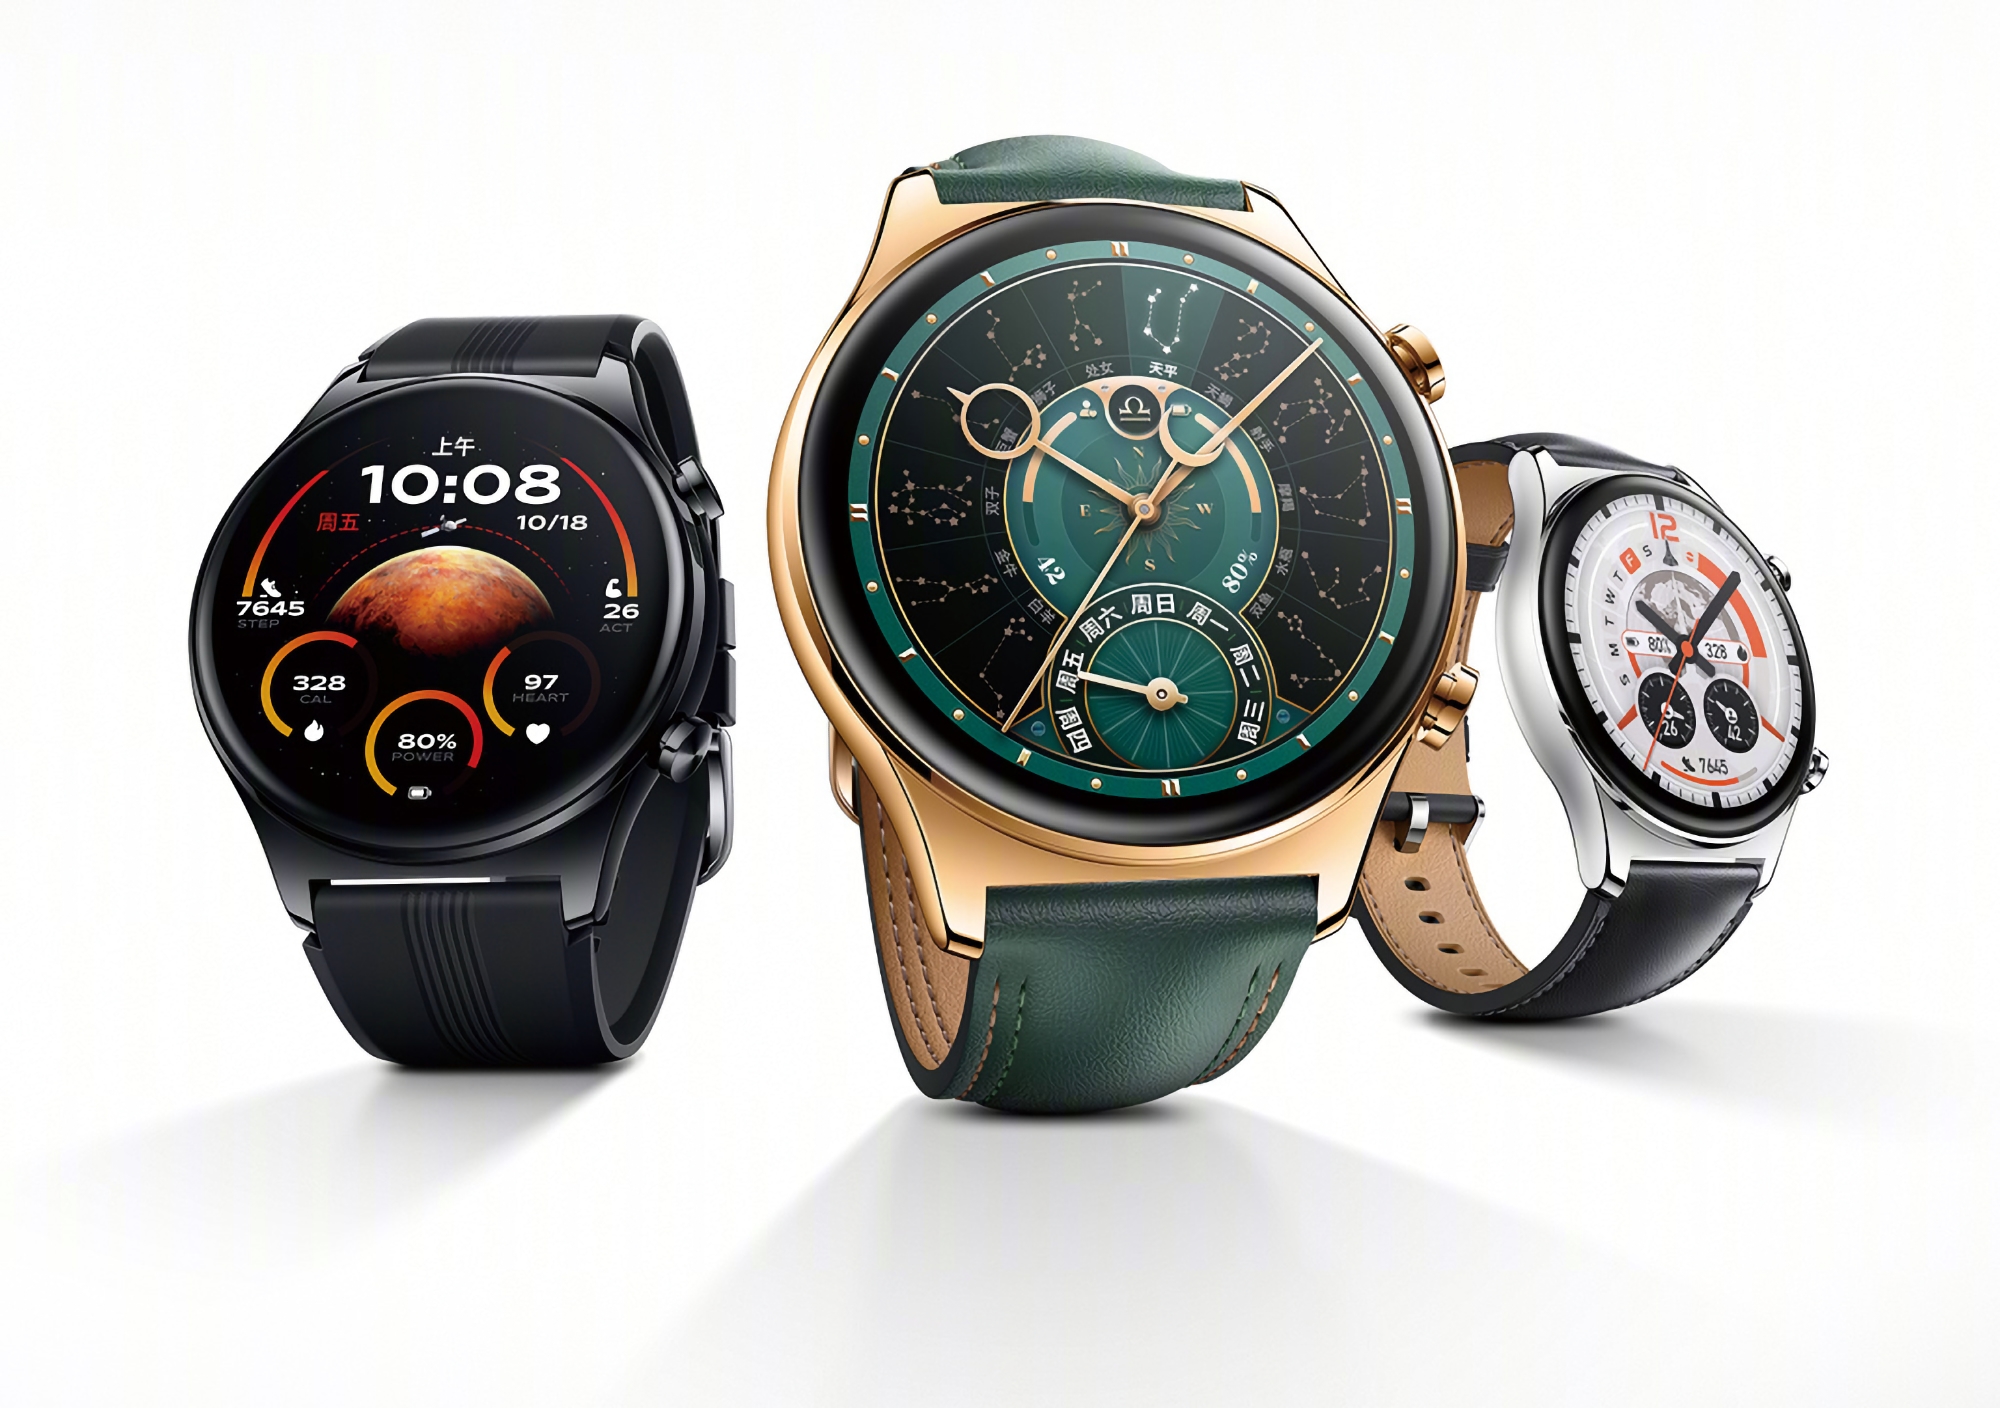 Honor Watch GS 4: AMOLED display, GPS, NFC, battery life up to 14 days and price from $139